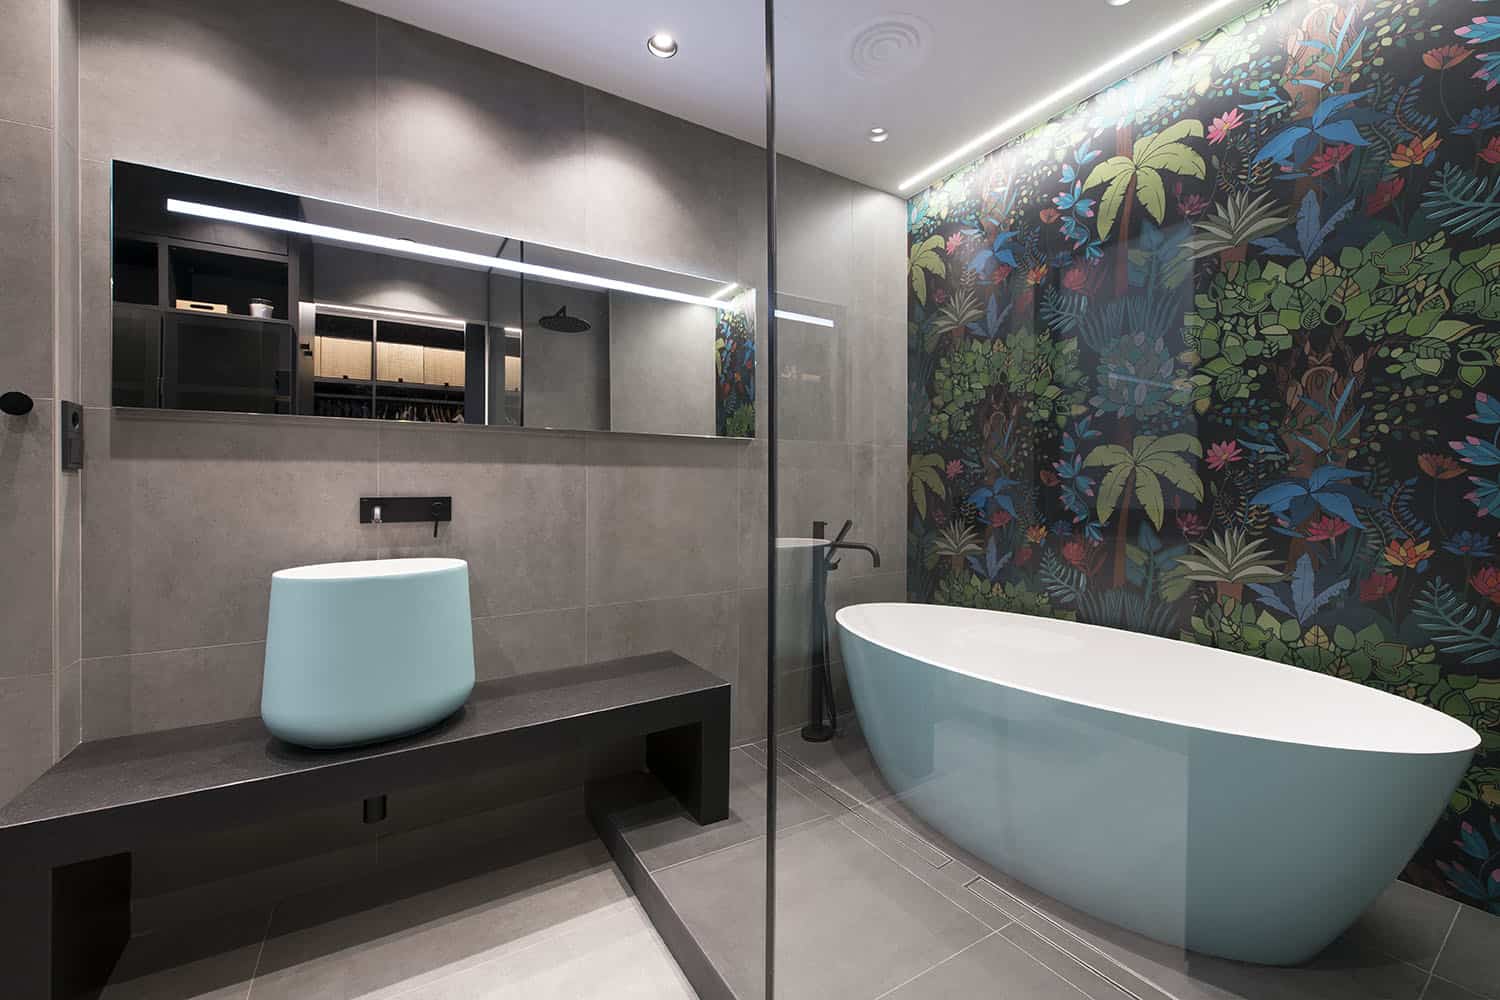 07 The bathroom is clad with grey tiles, a dark floral wall makes a statement and aqua appliances add to the space